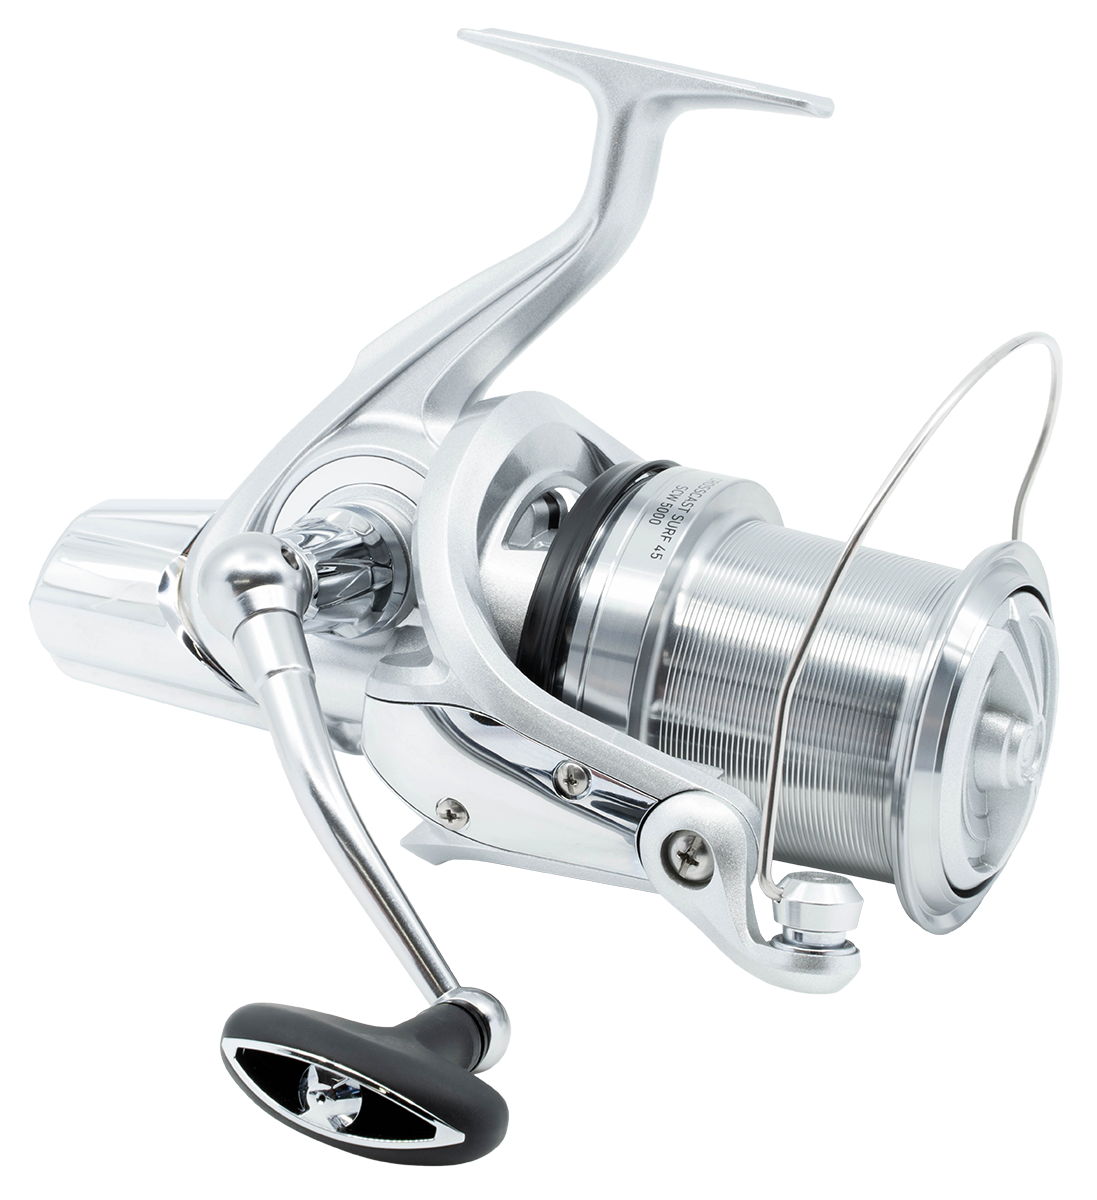 Crosscast Spin Reels